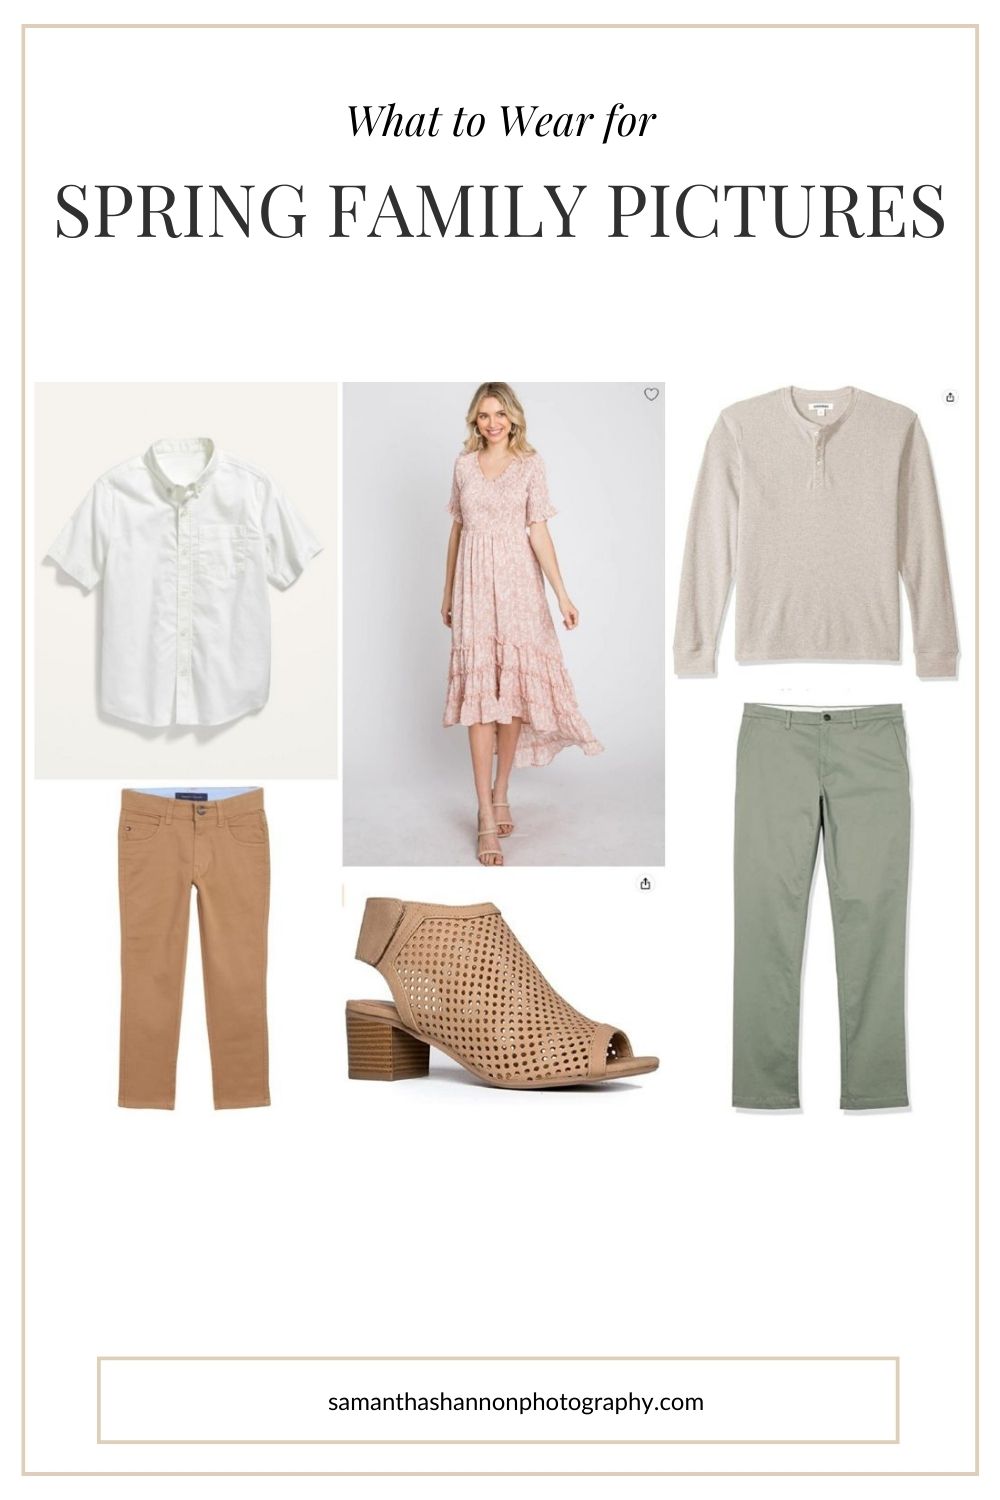 Spring Outfit Ideas - What To Wear To Spring Into Spring! - Dear Creatives